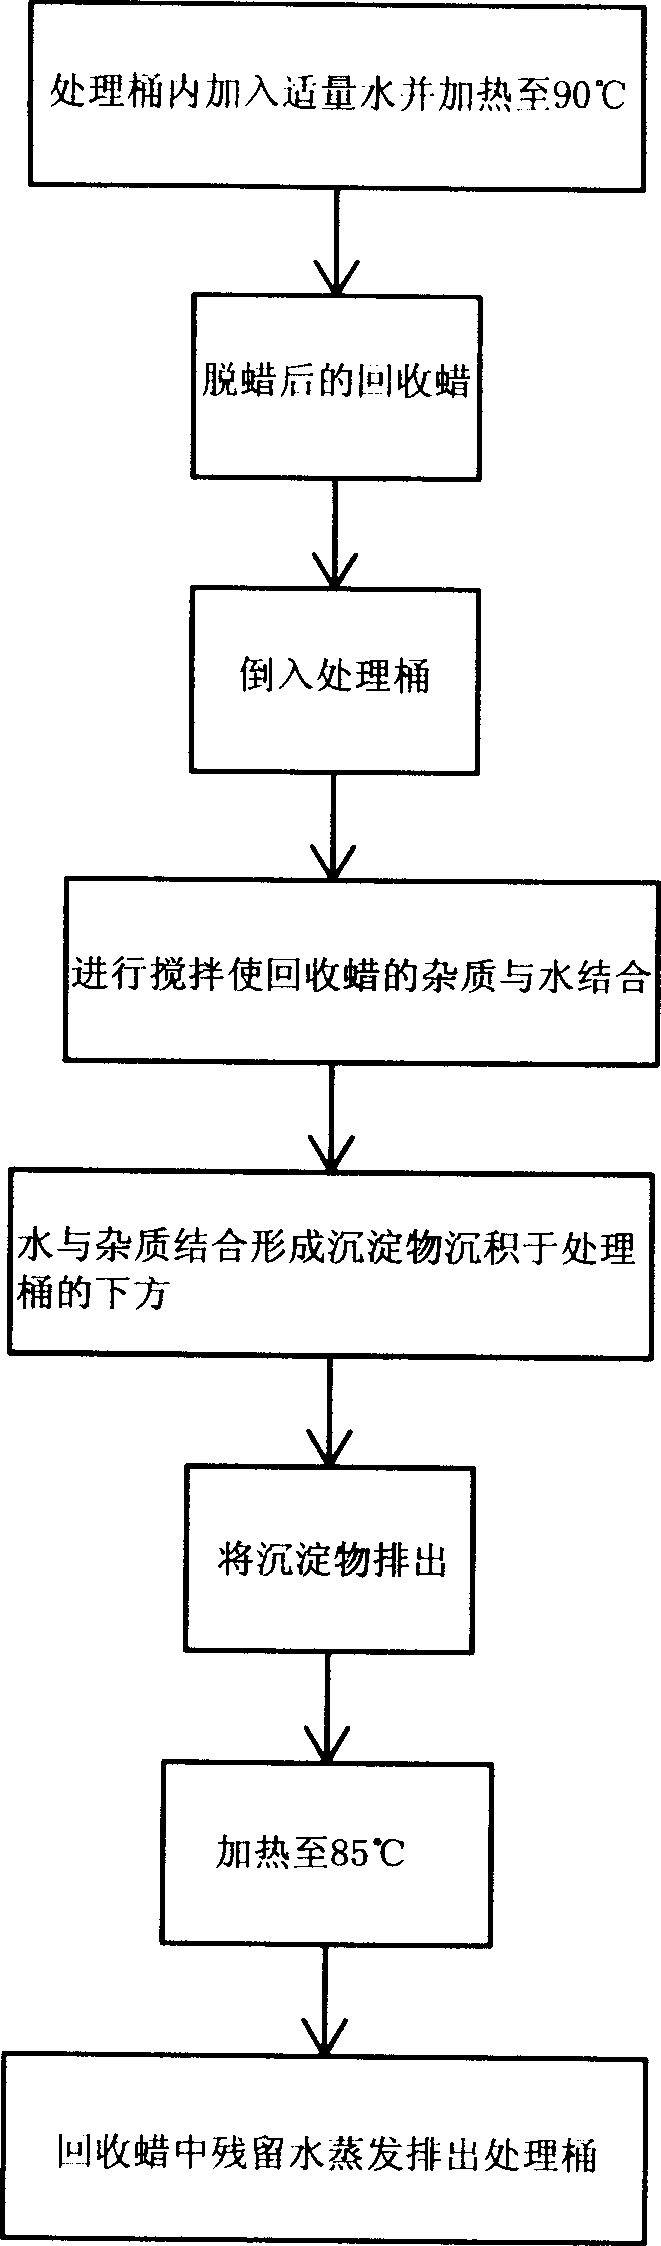 Method for processing recovered wax